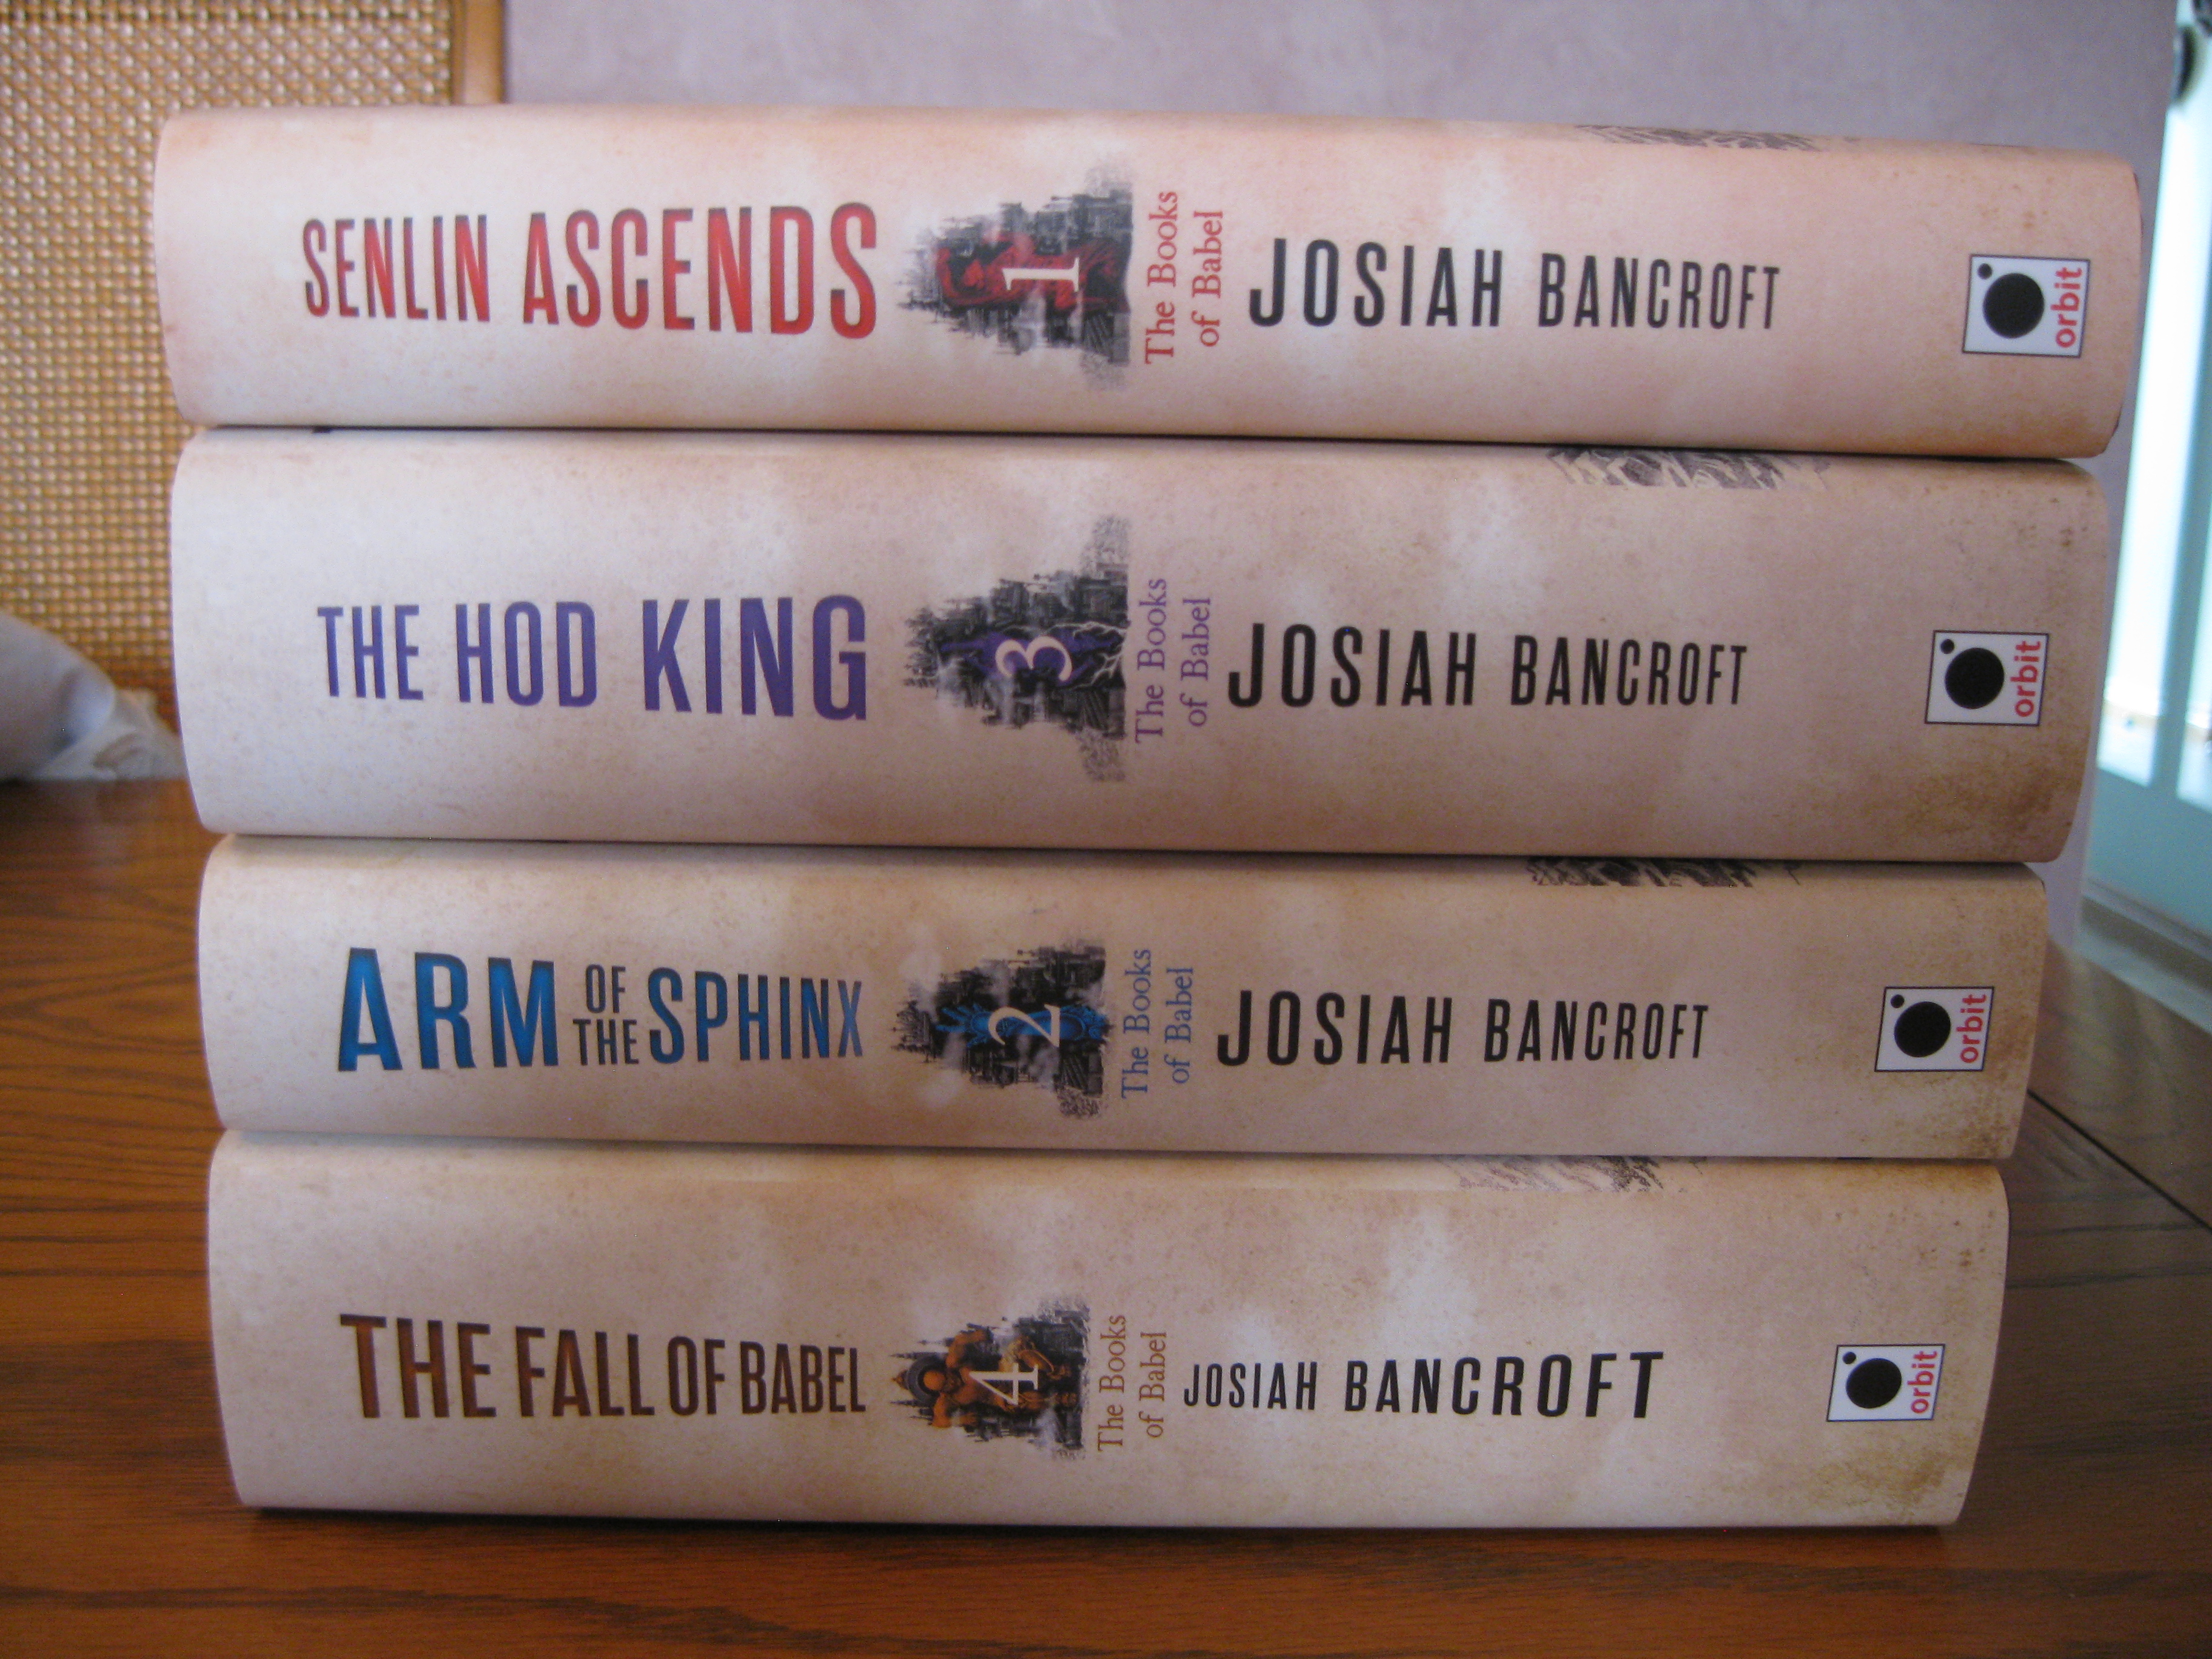 The Fall of Babel (The Books of Babel, #4) by Josiah Bancroft